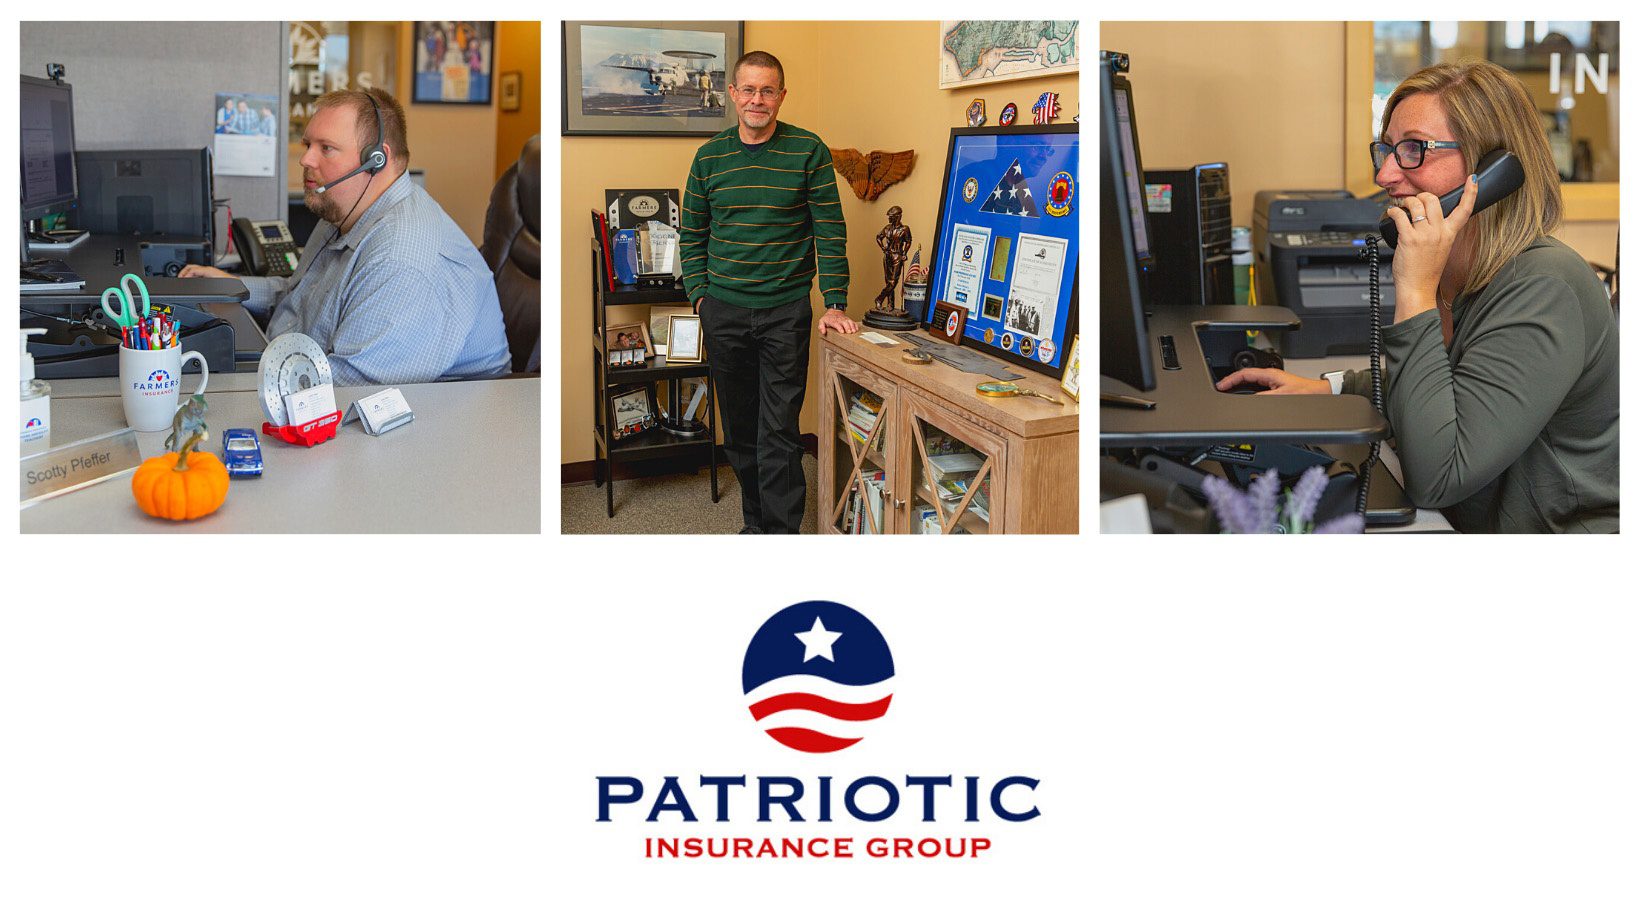 About Our Agency - Portrait of Patriotic Insurance Group Team Members Working Inside the Office